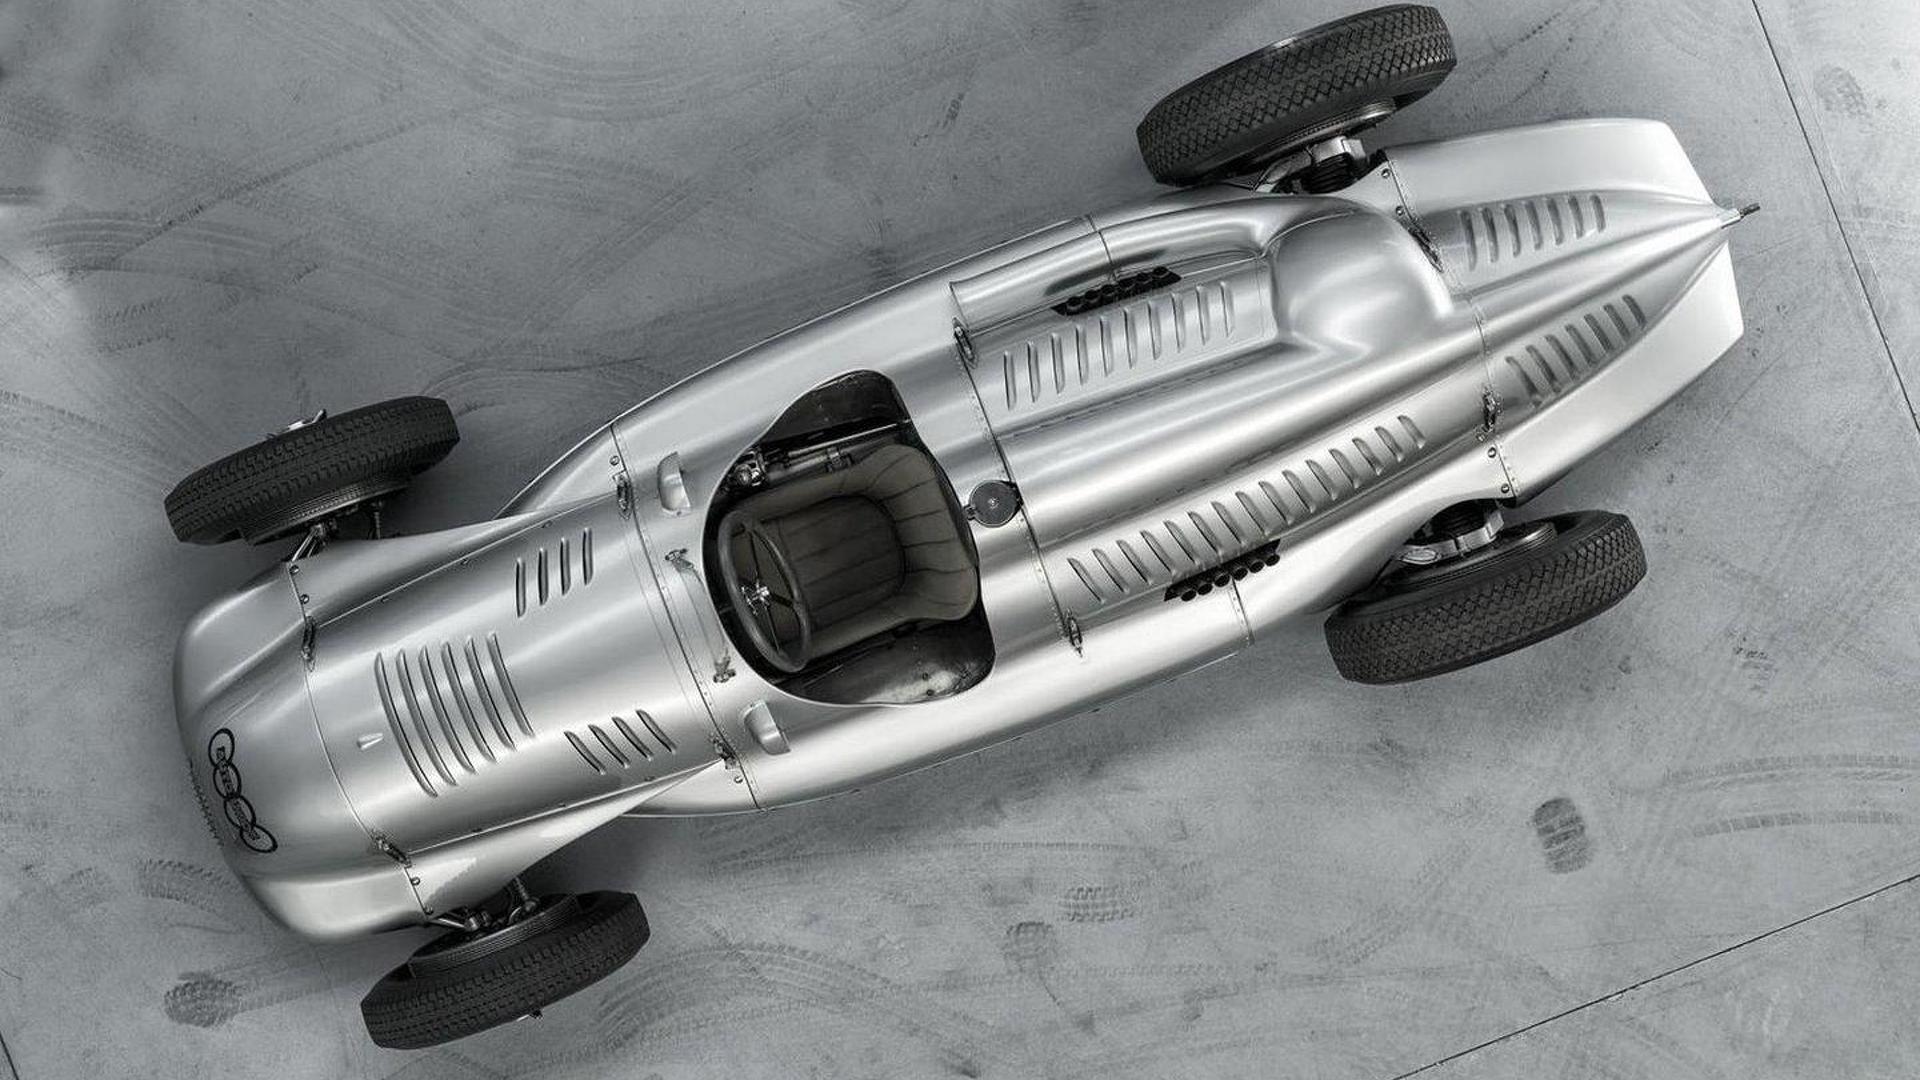 Auto Union Silver Arrow Type A Wallpapers